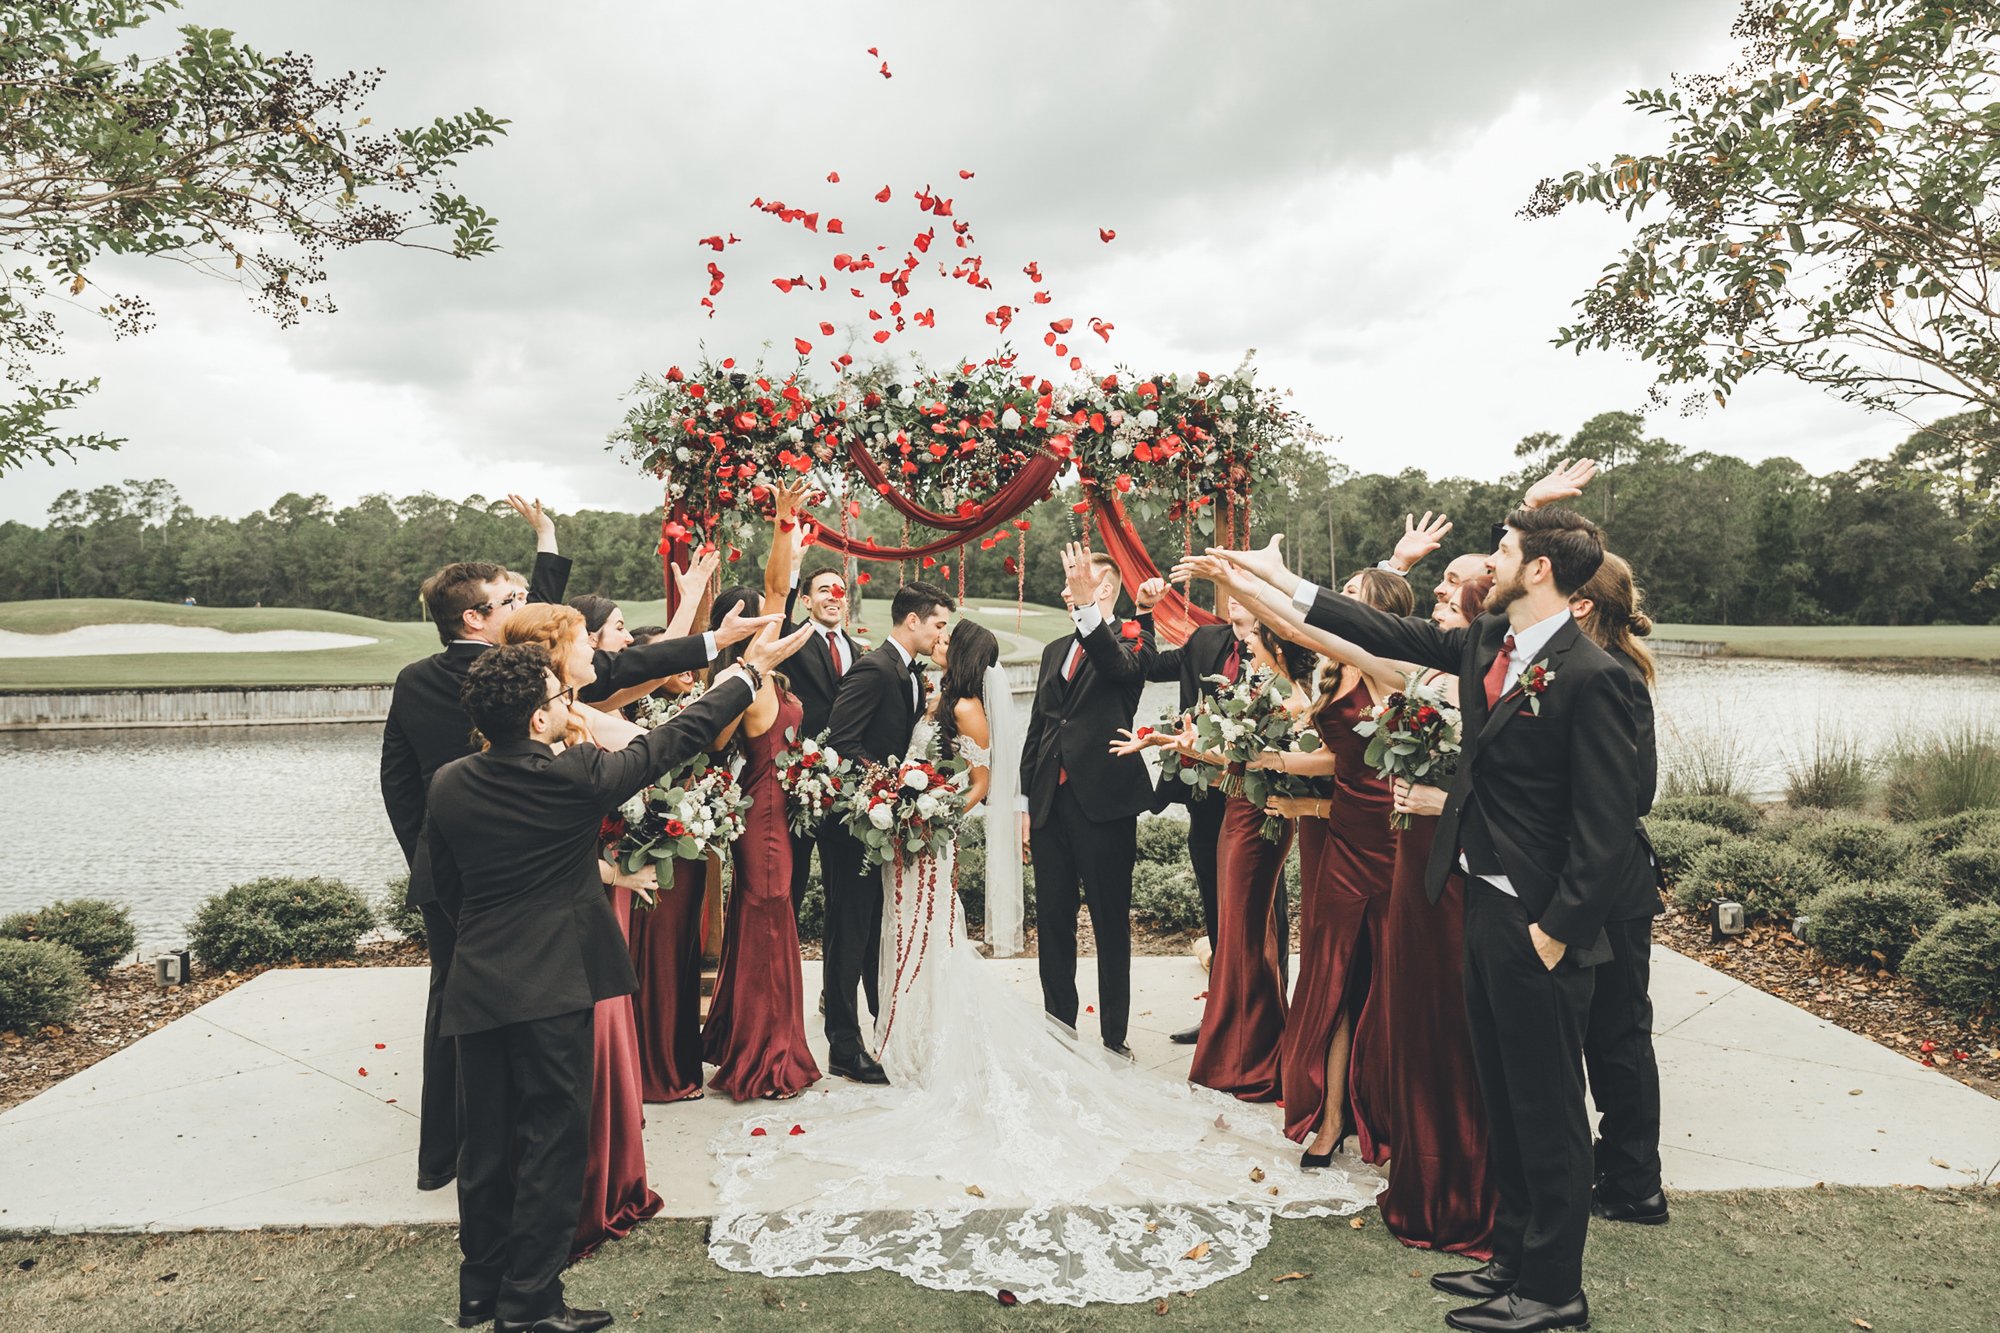 Bow Tie Photo and Video kiss after wedding ceremony in St Augustine, FL.jpg